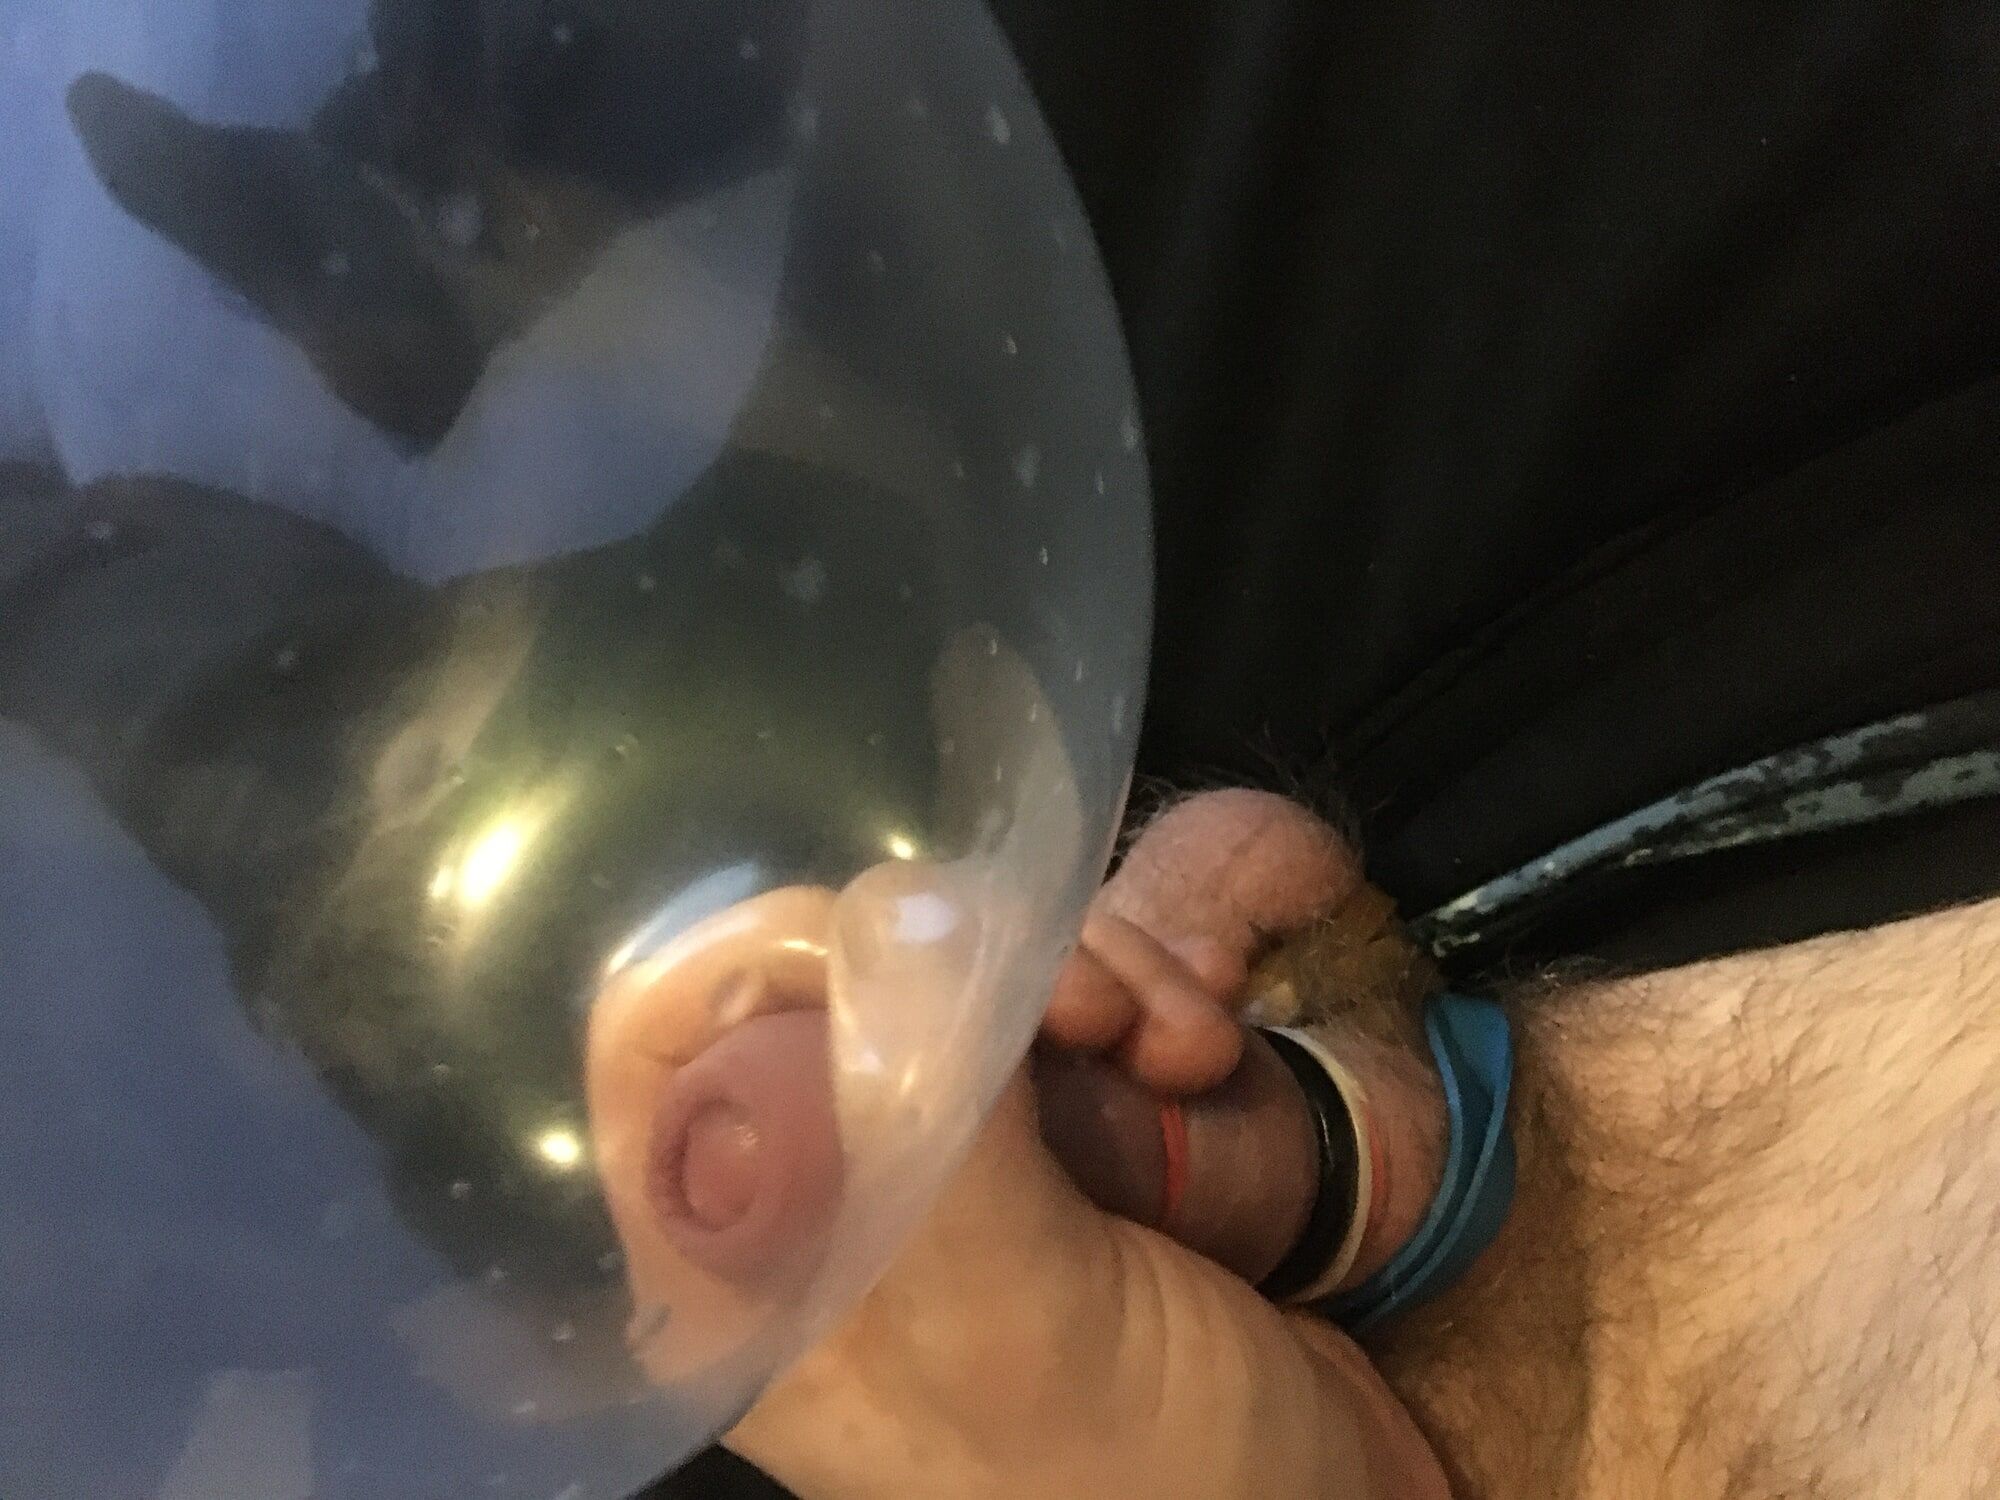  Haired Dick And Balls With Rubber Bands Condom Ballon  fuck #60